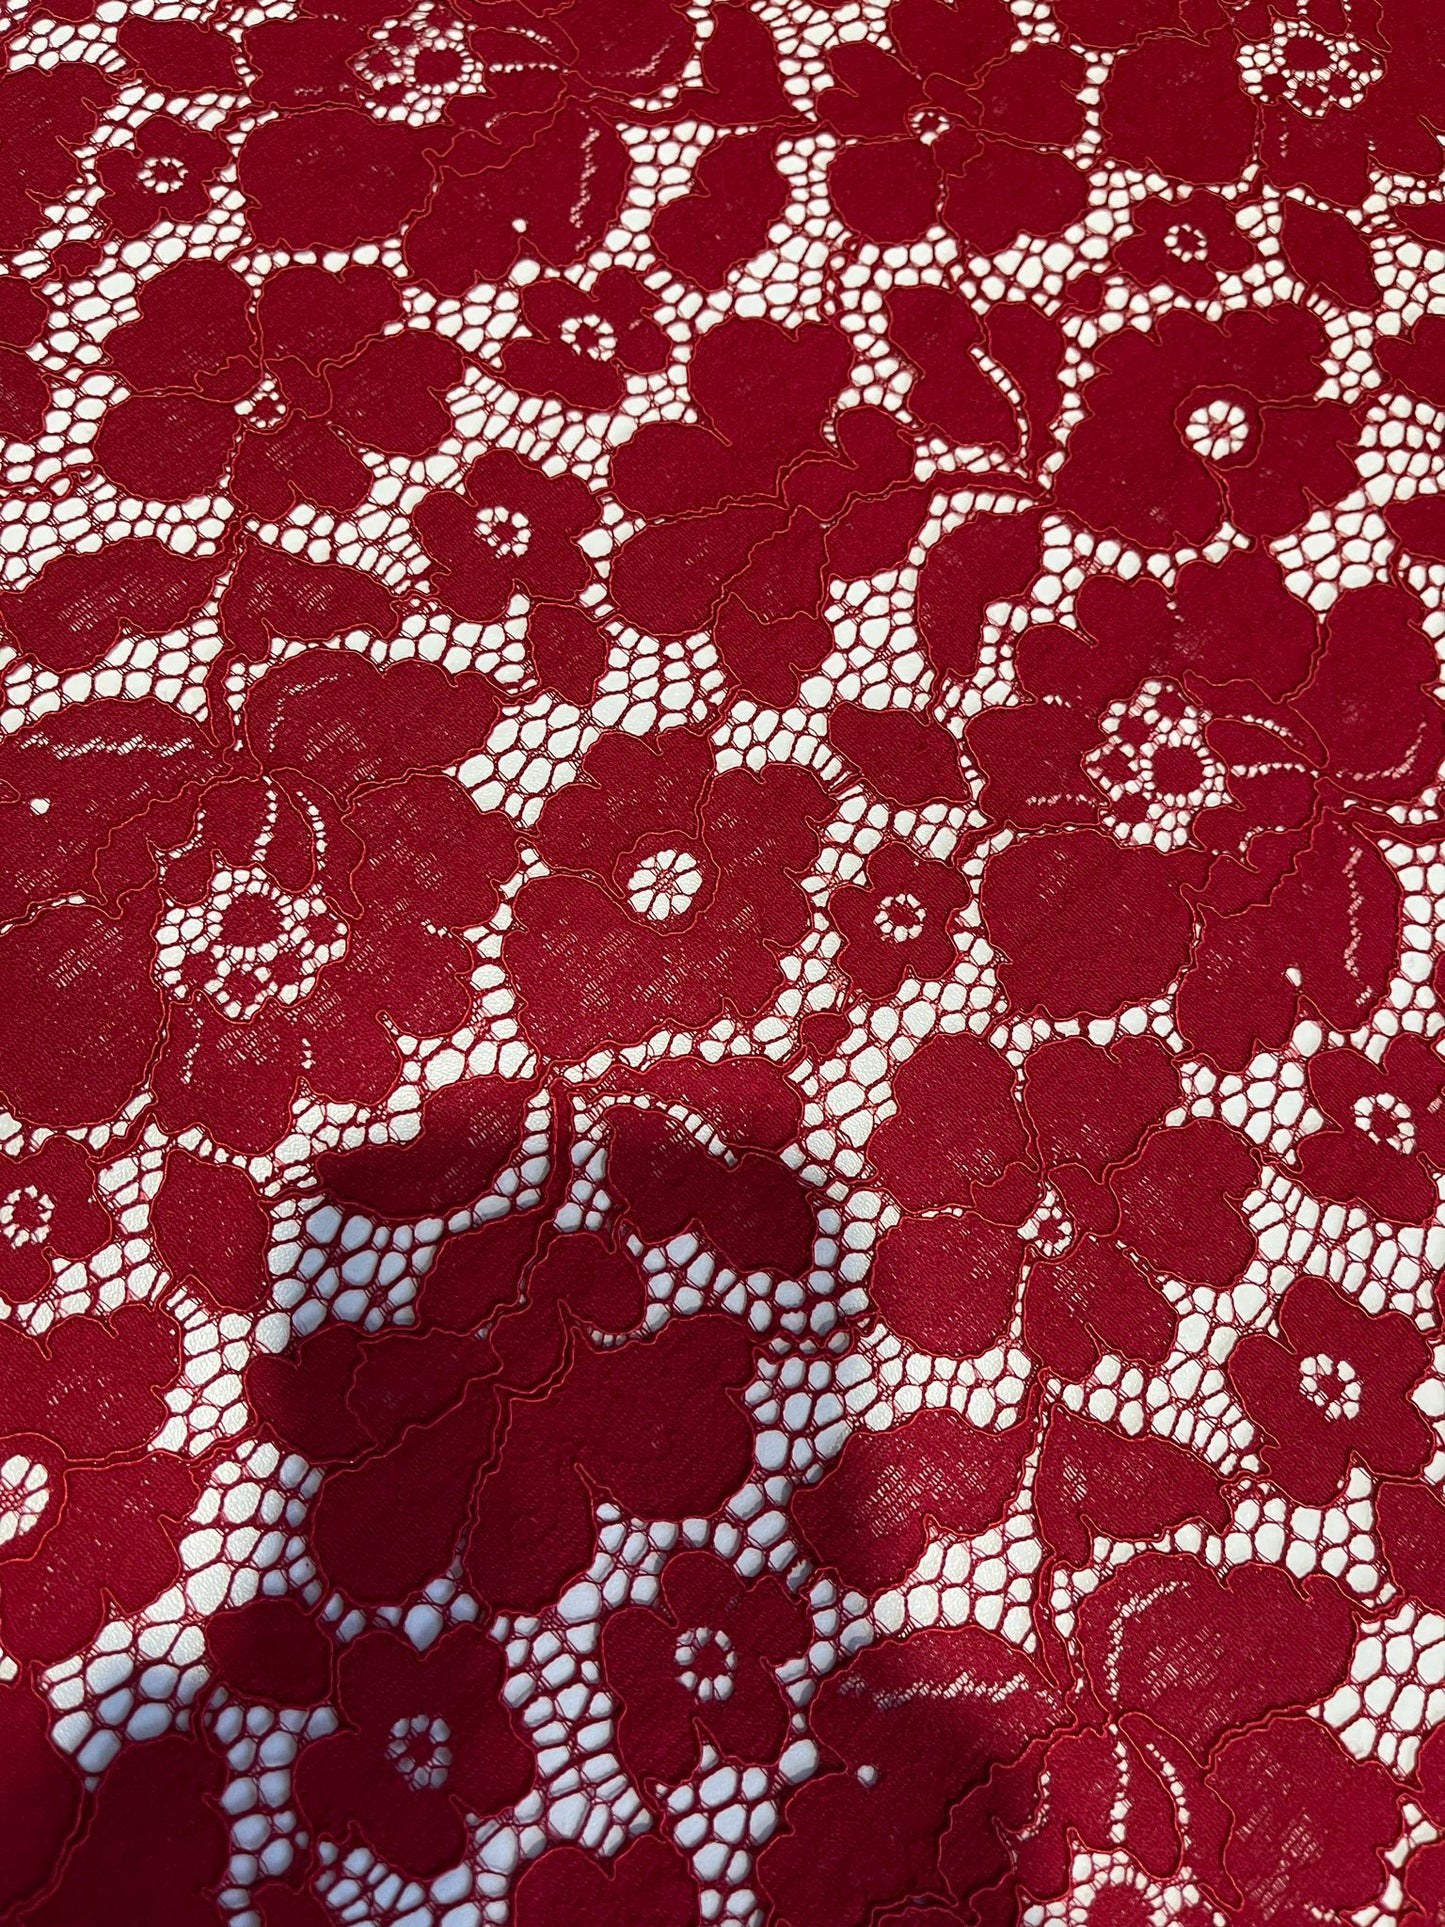 HIT 097 COTTON LACE double border  RED